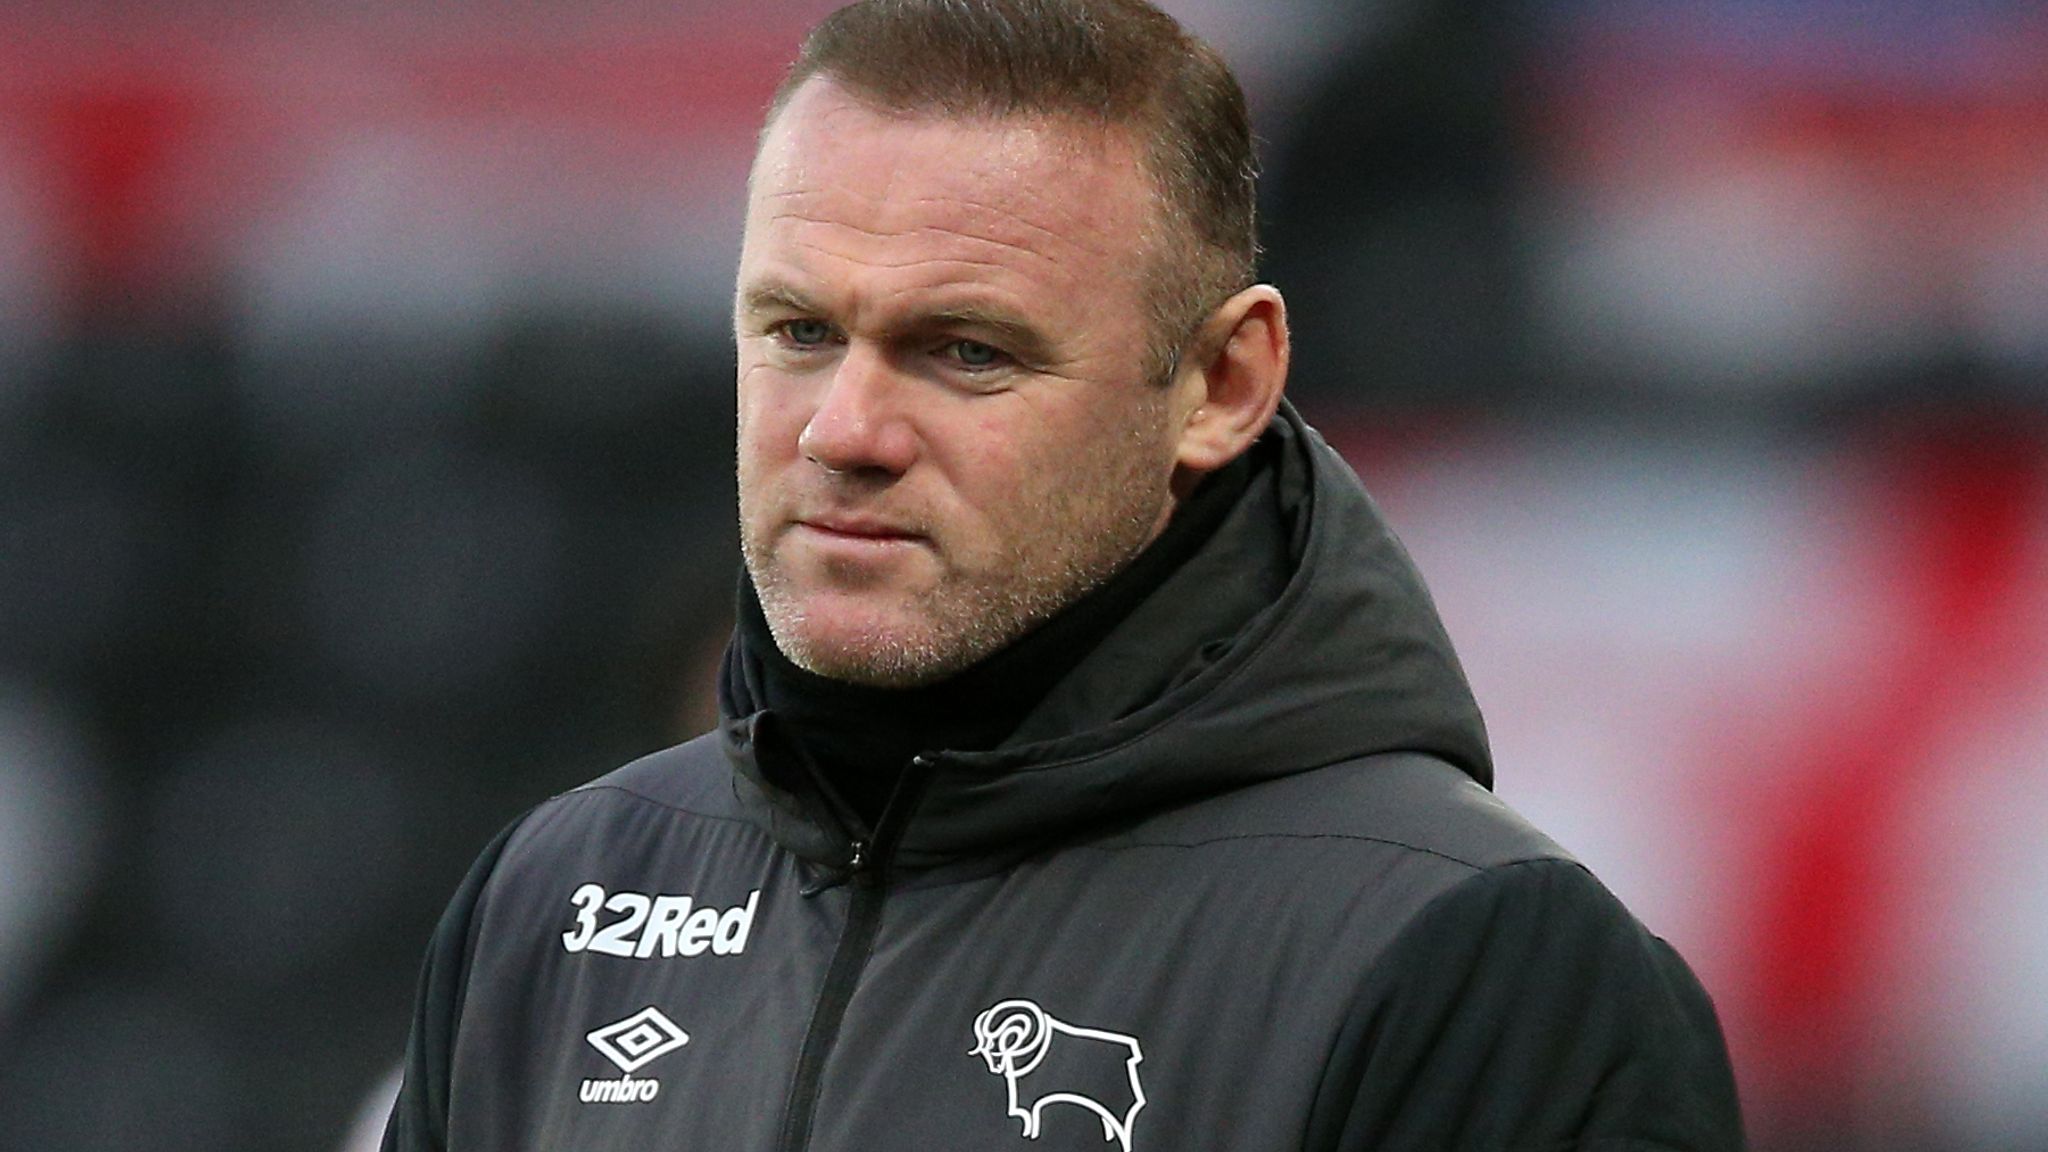 Derby County Wayne Rooney Manager / 3 : The rams have won their last